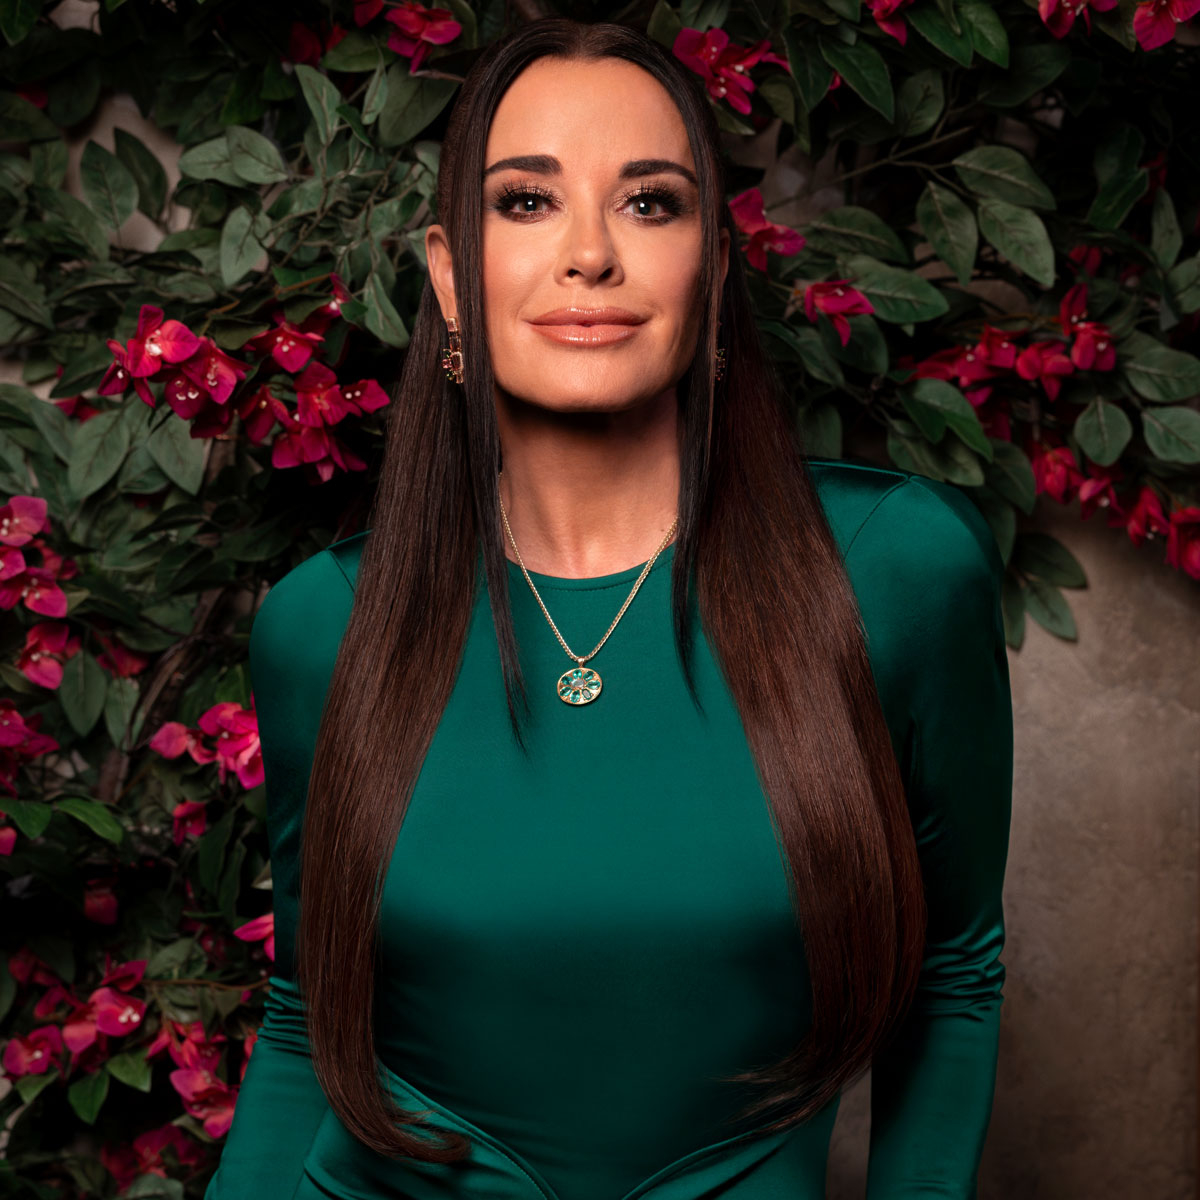 Real Housewives' Kyle Richards Influenced Me To Buy These 53 Products